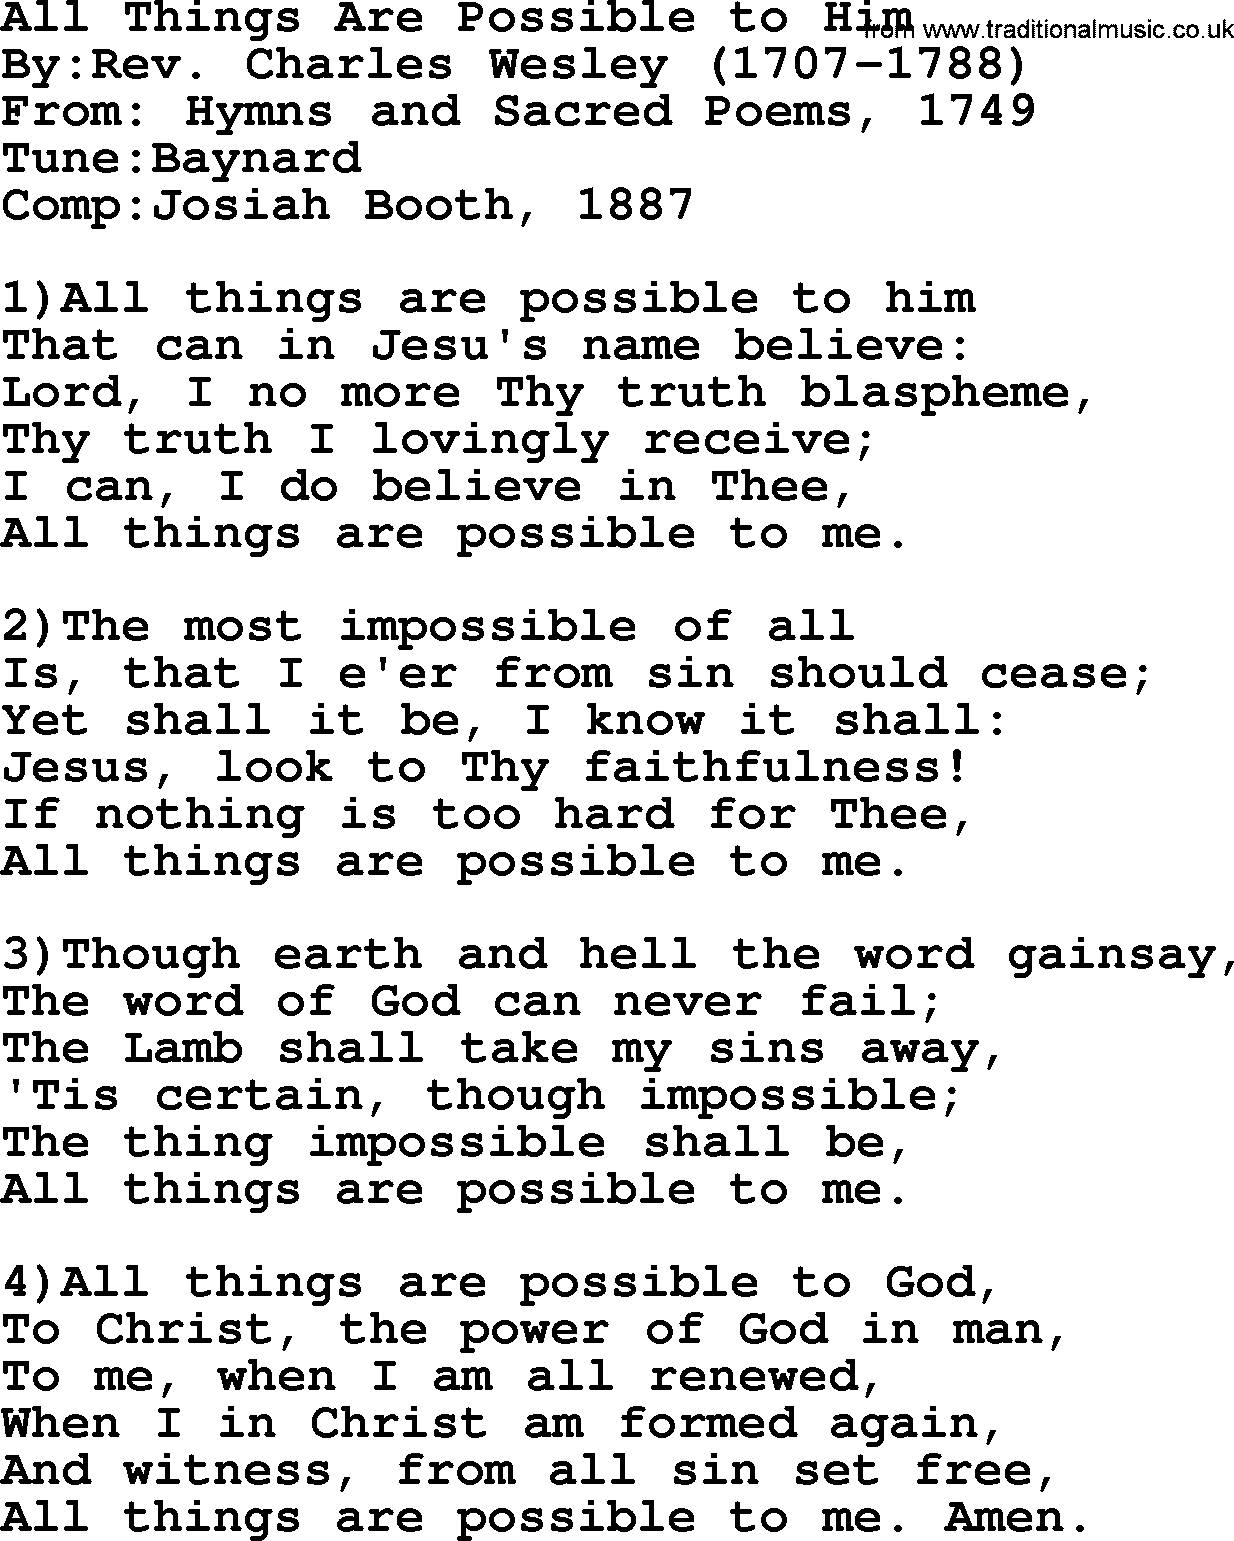 Methodist Hymn: All Things Are Possible To Him, lyrics